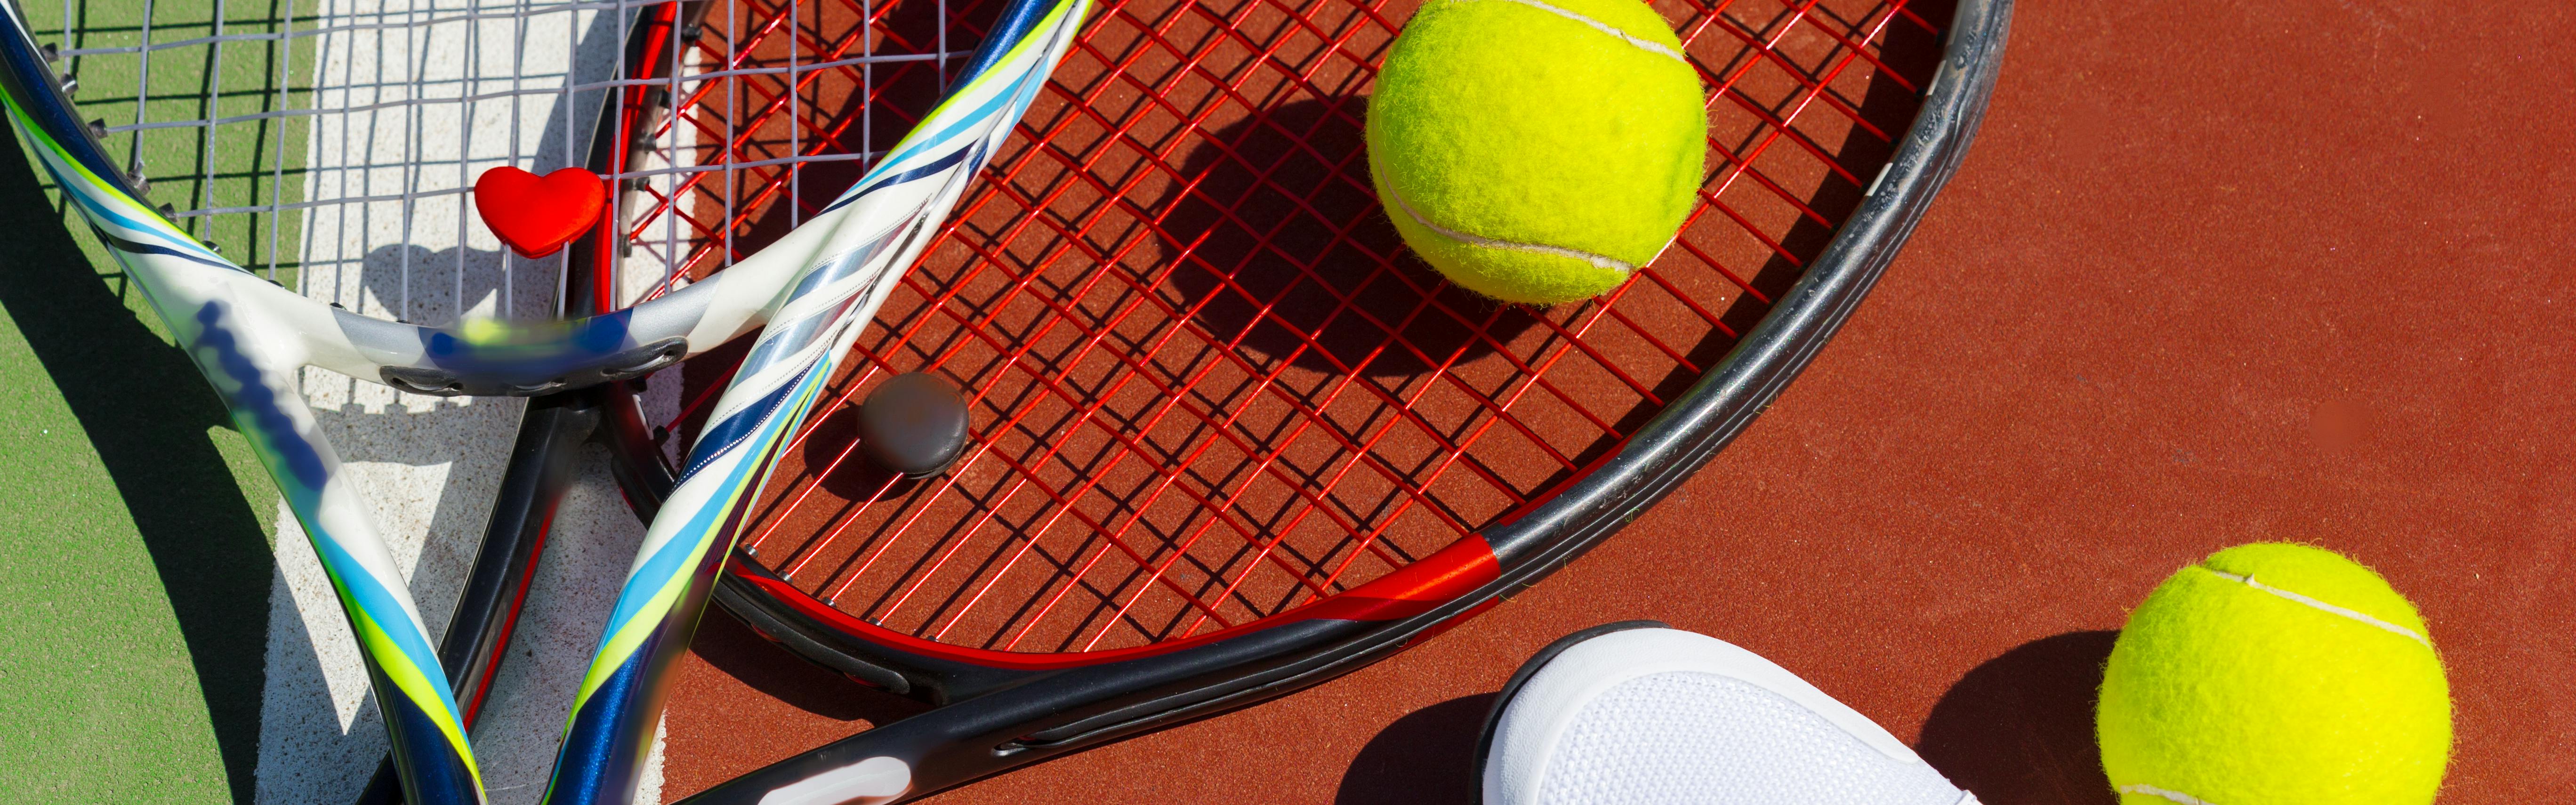 The 13 Best Tennis Brands for Racquets, Clothing, and More